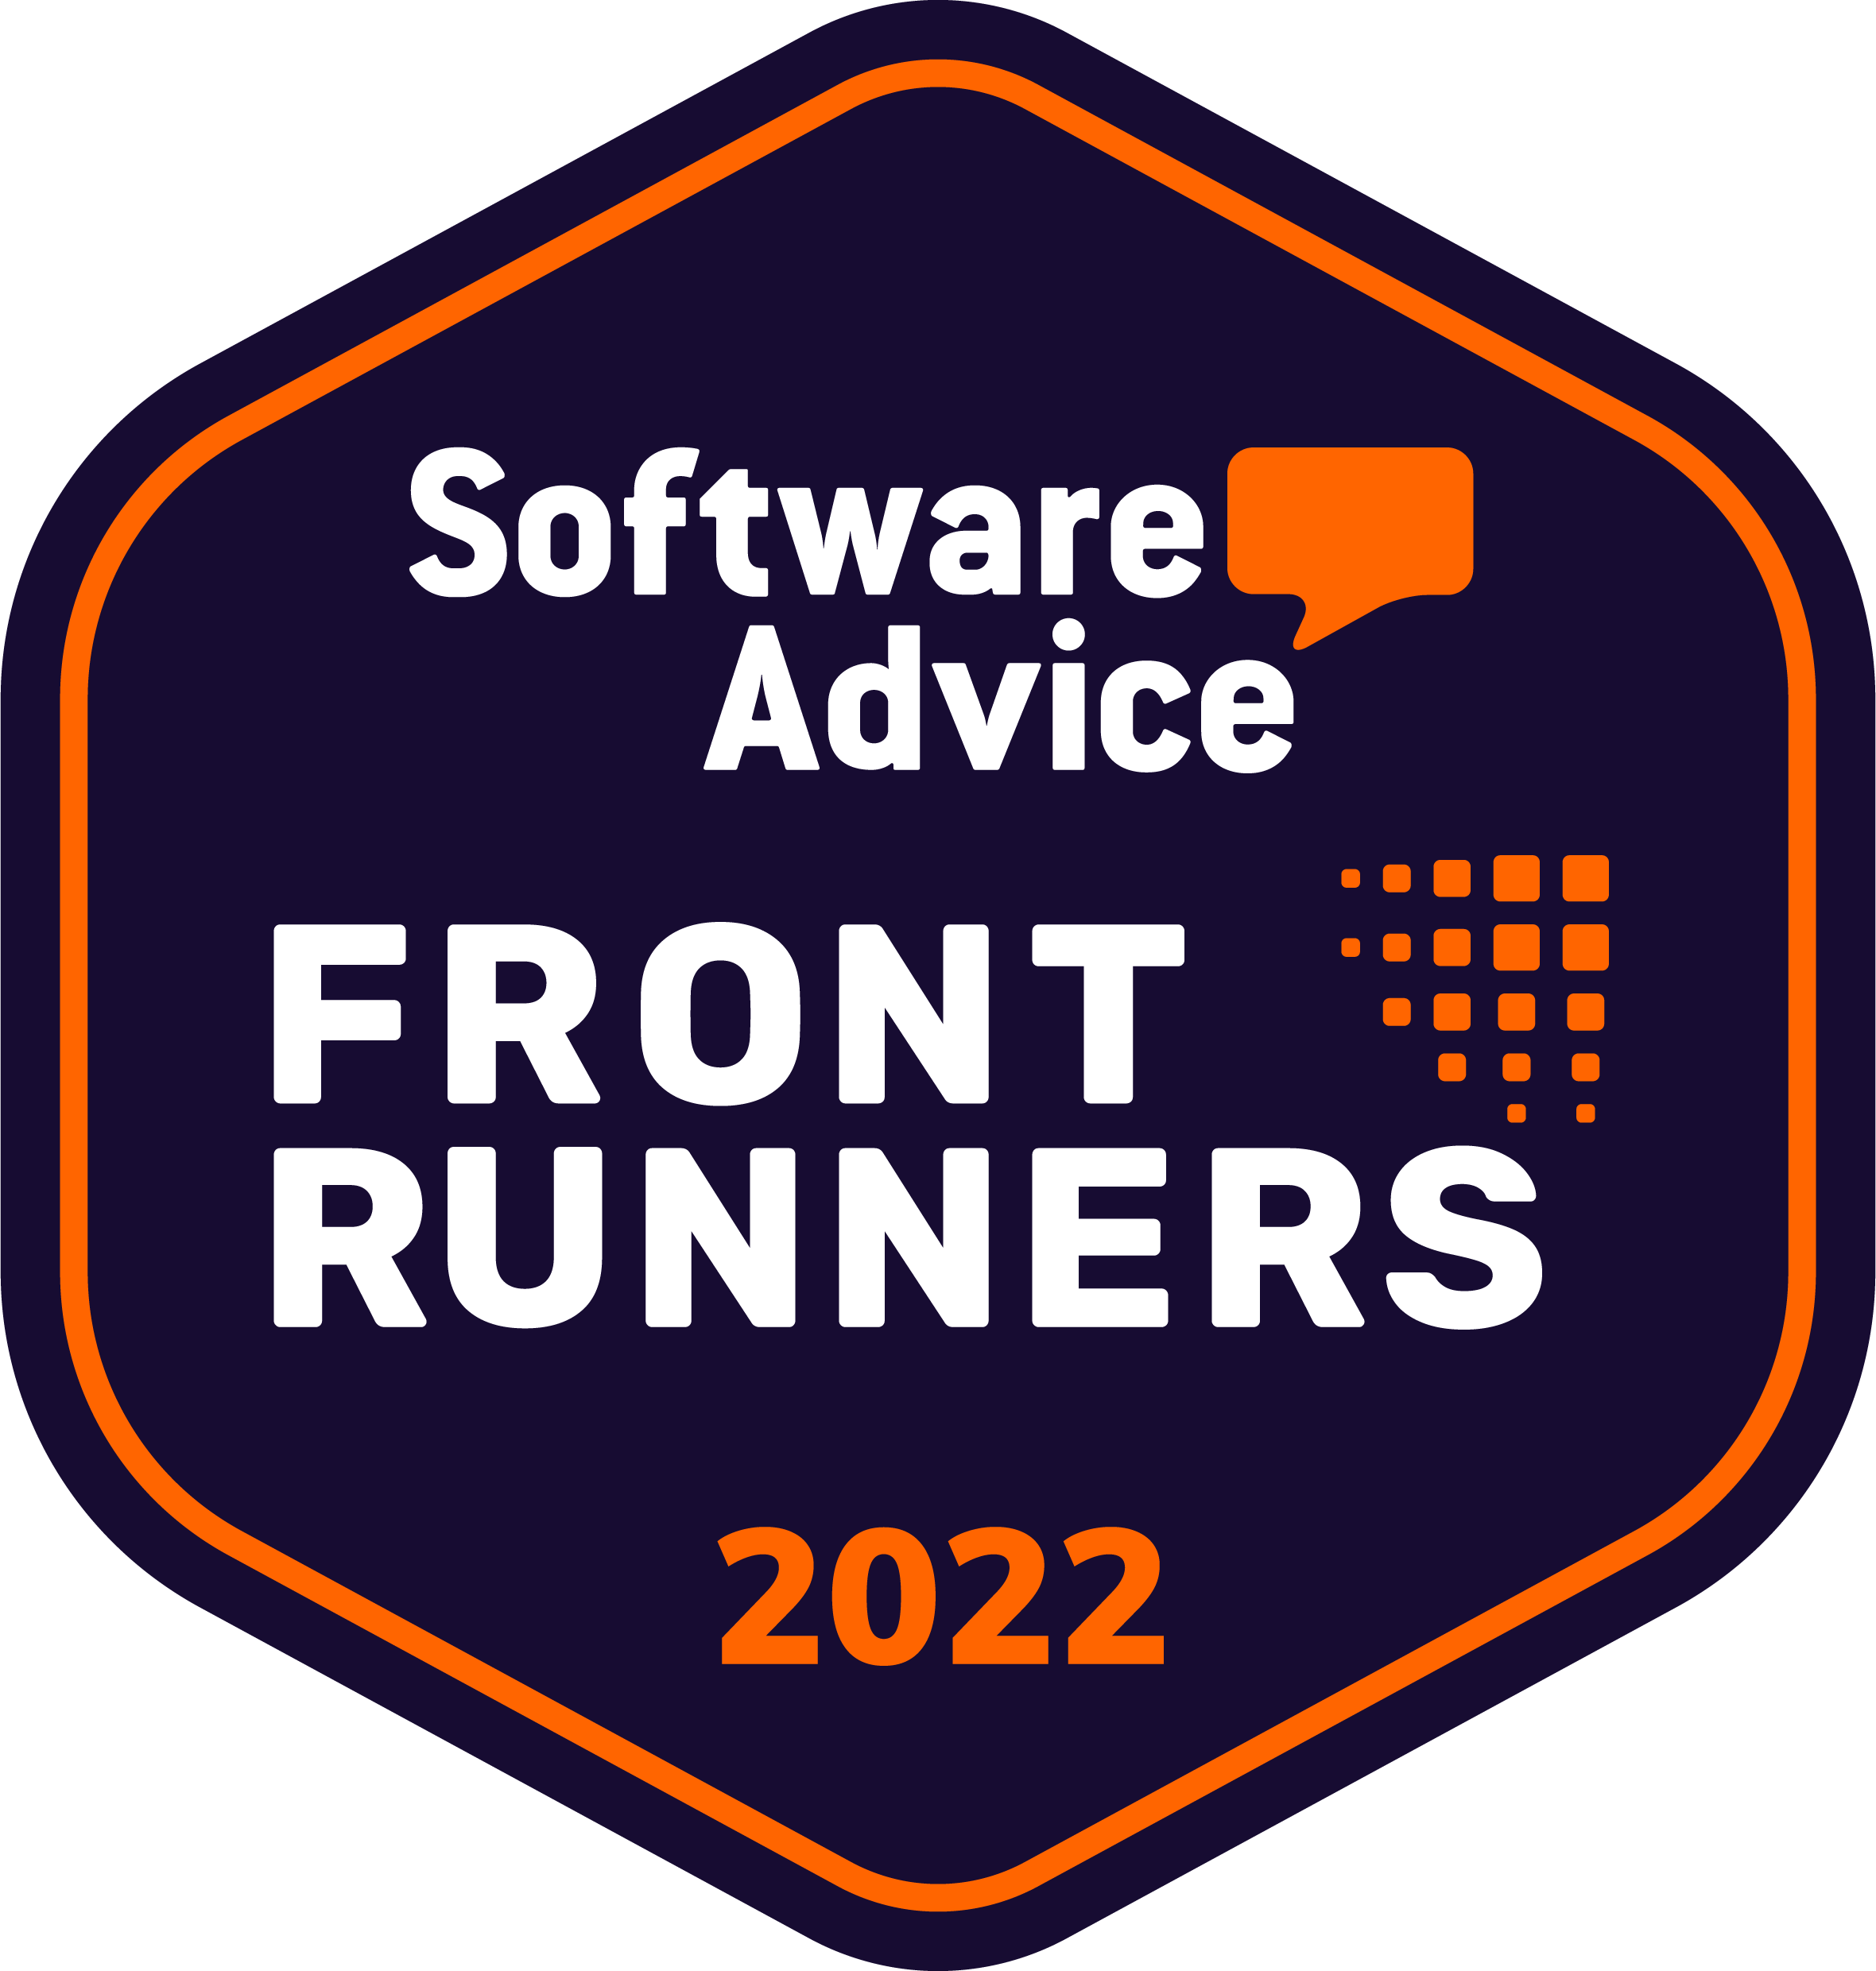 Software Advice Badge FrontRunners 2022 Contractor Management